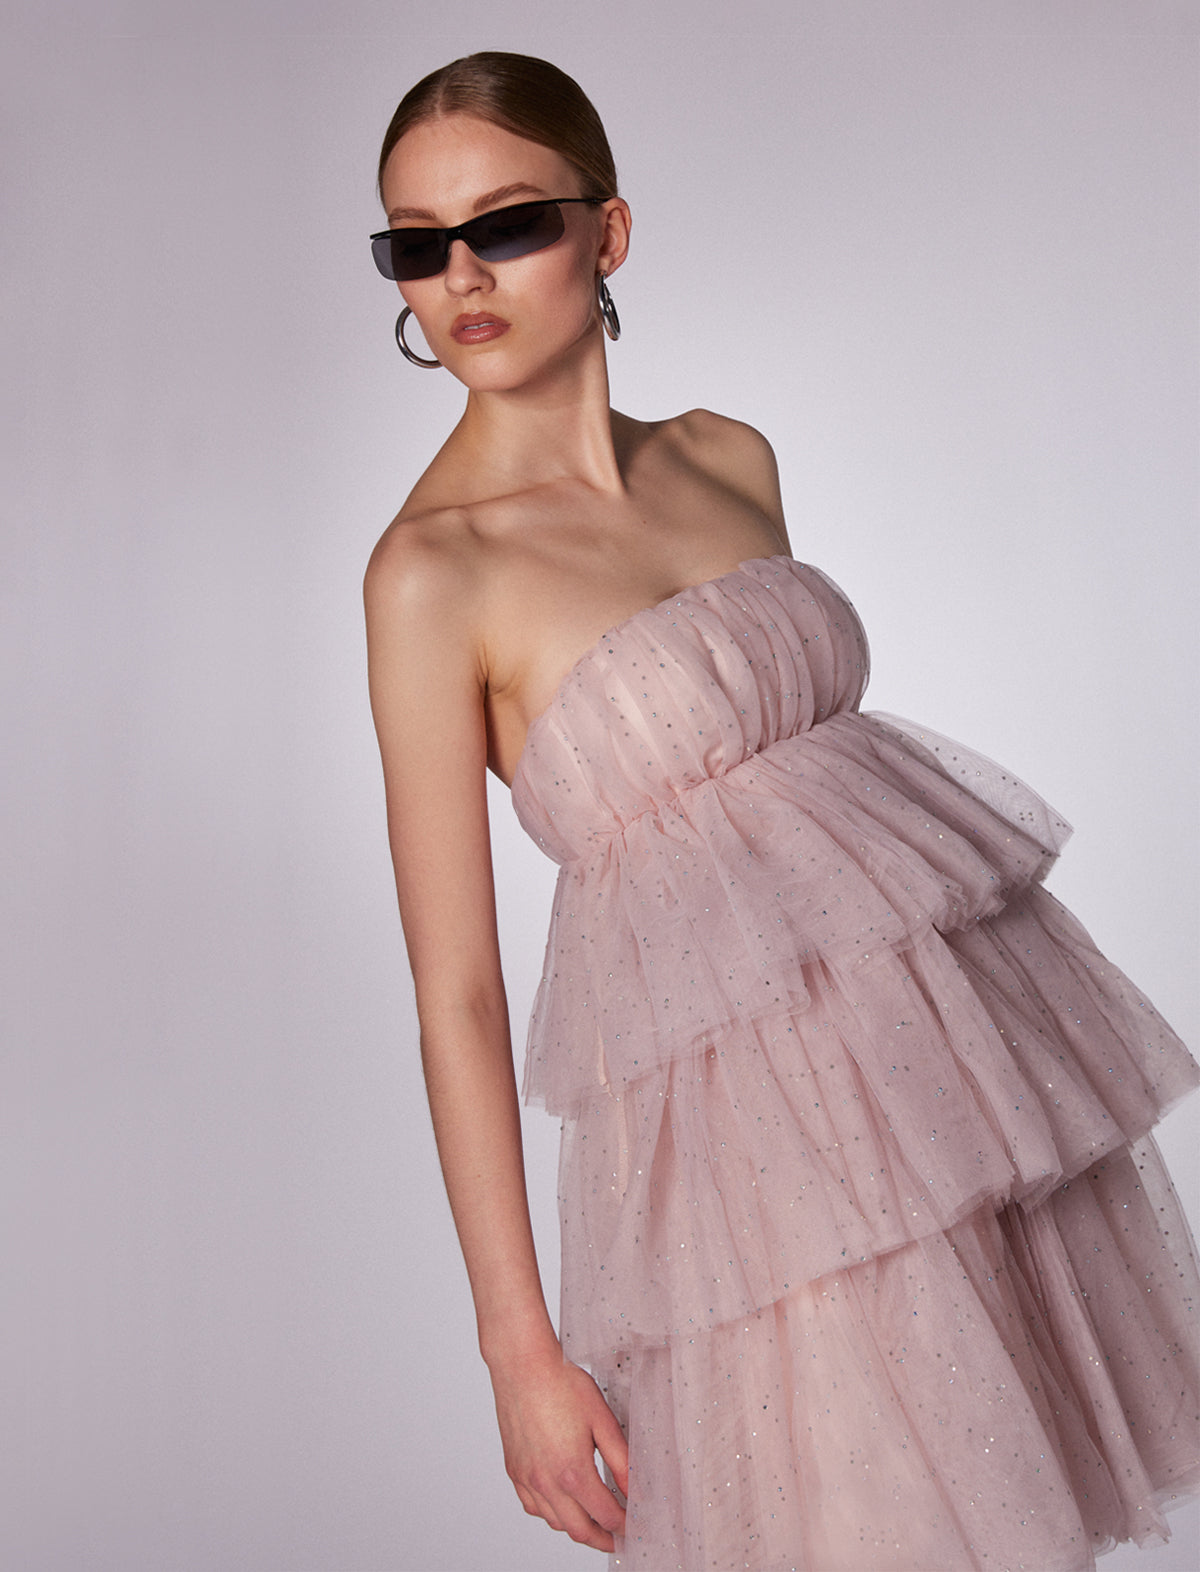 ROTATE ICONS Carlosa Crystal Tulle Ruffle Dress in Delicacy